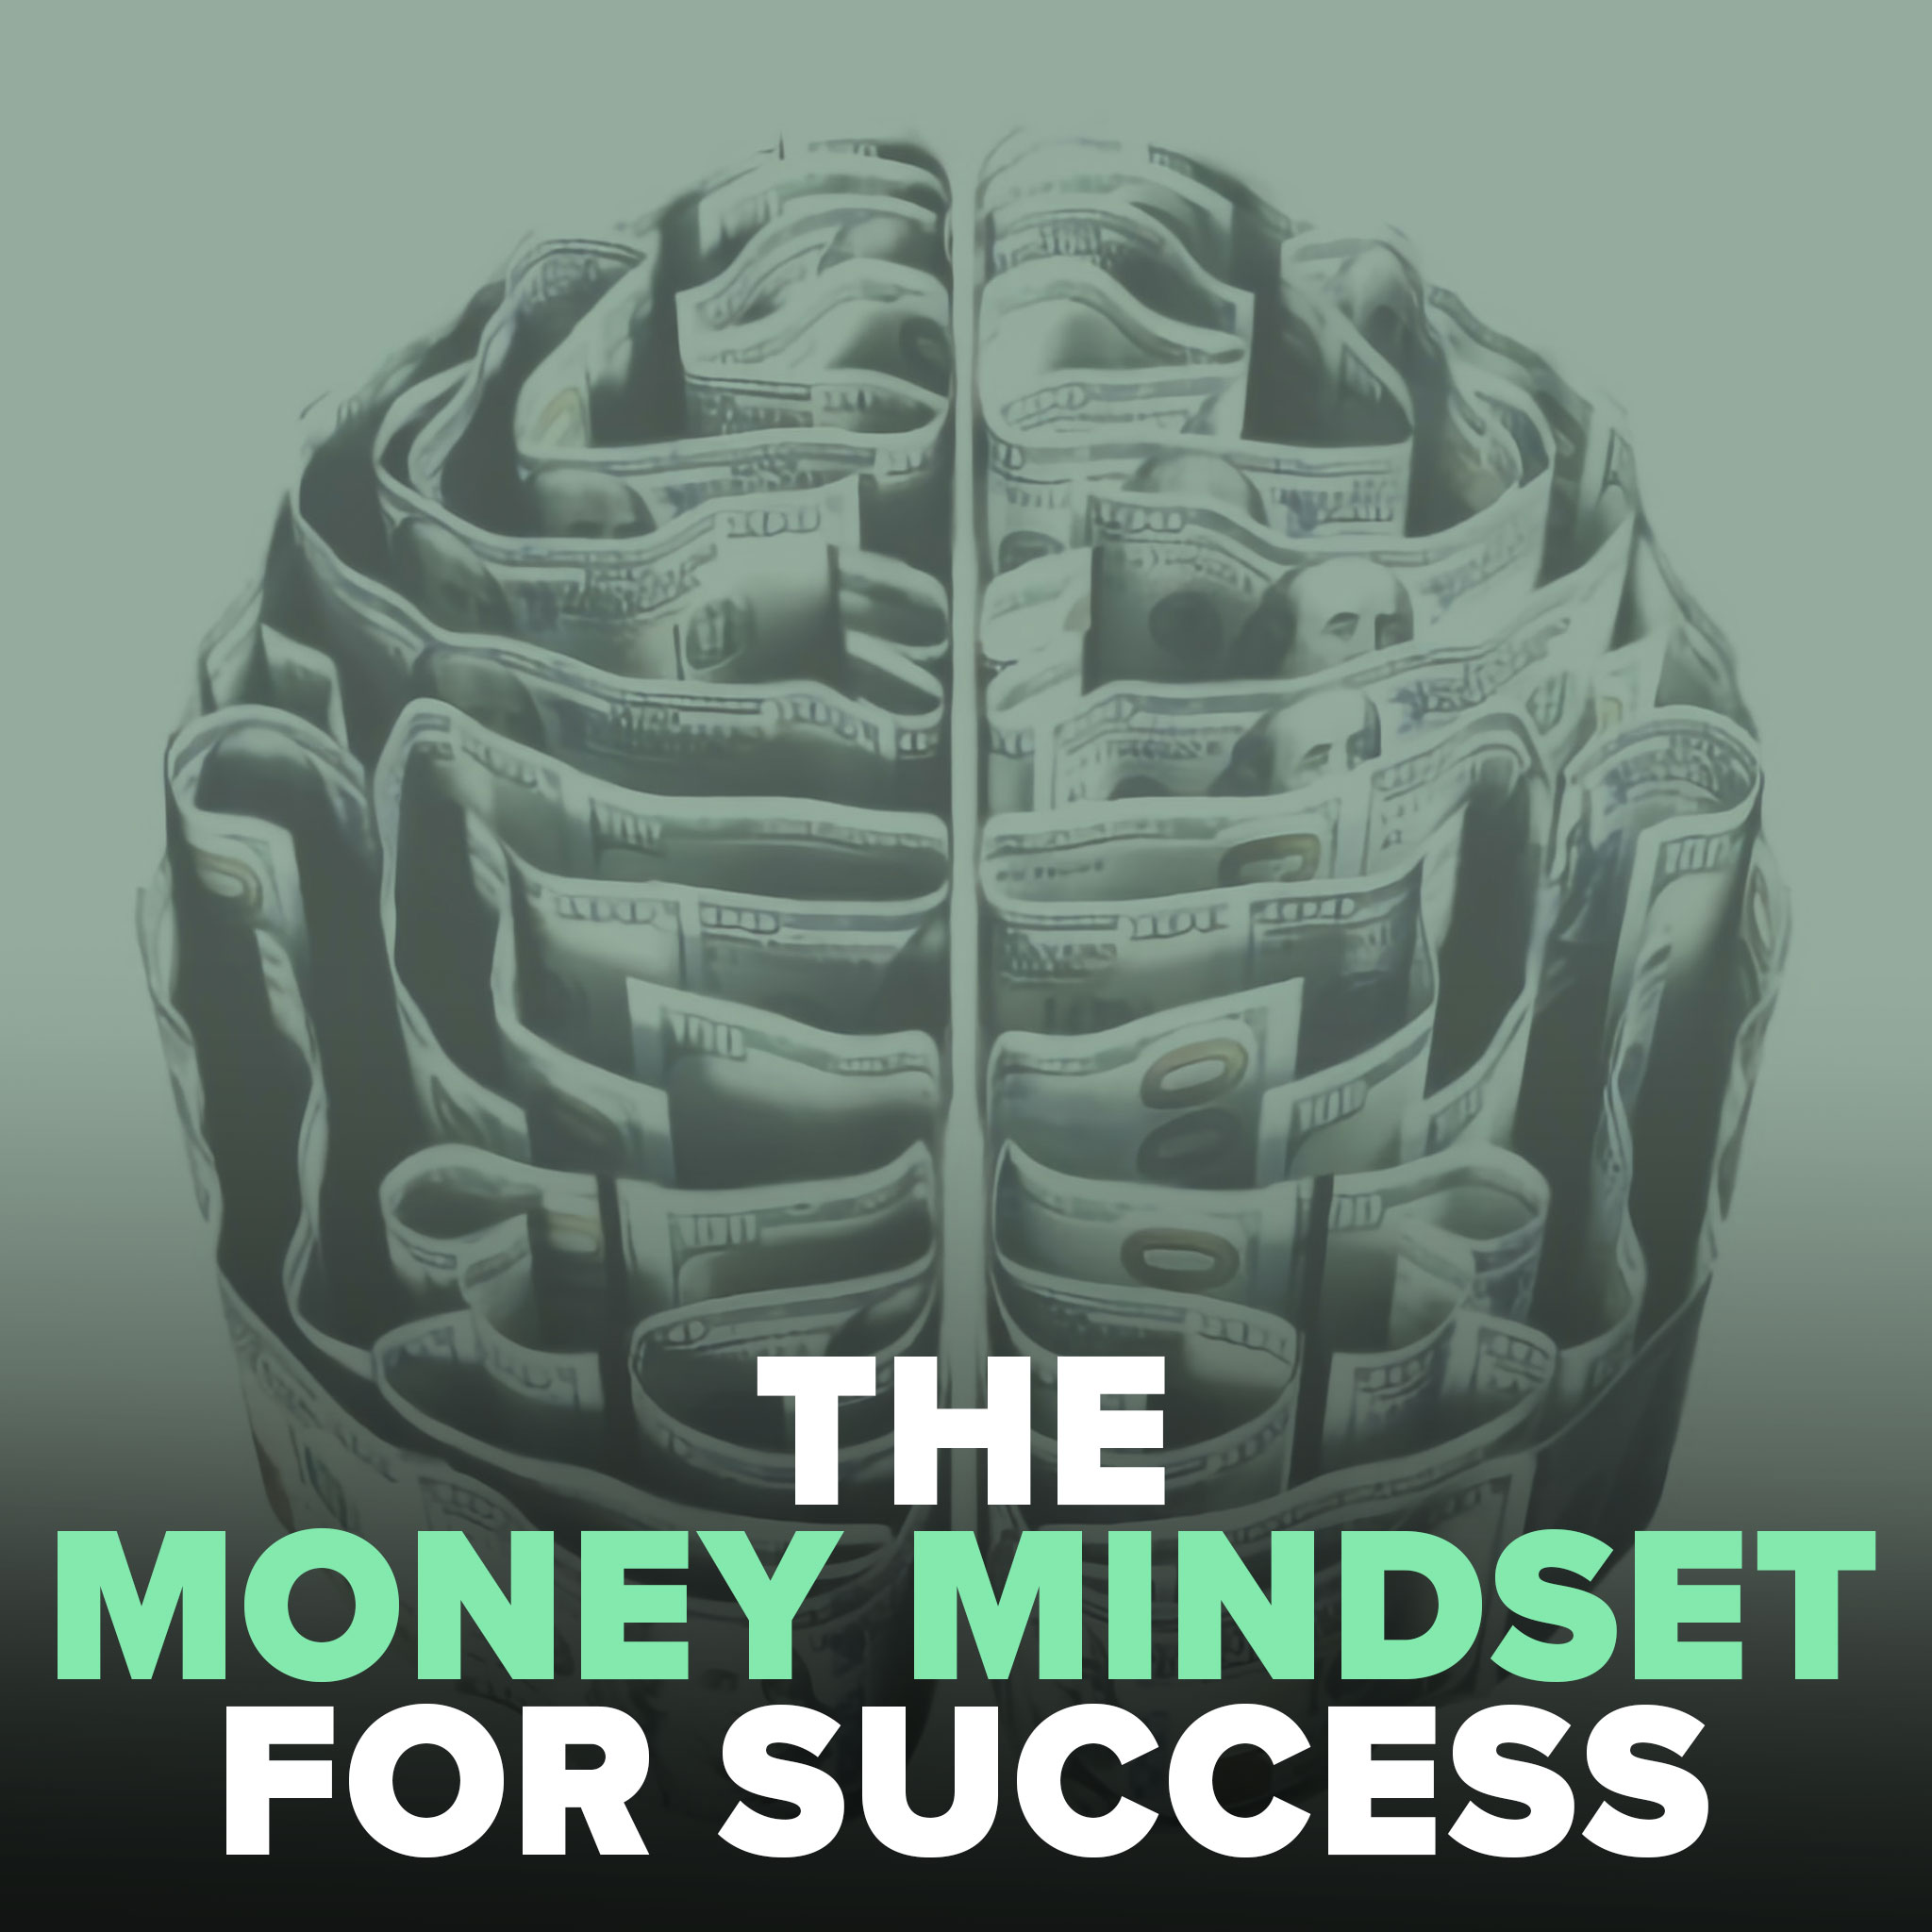 The Money Mindset for Success